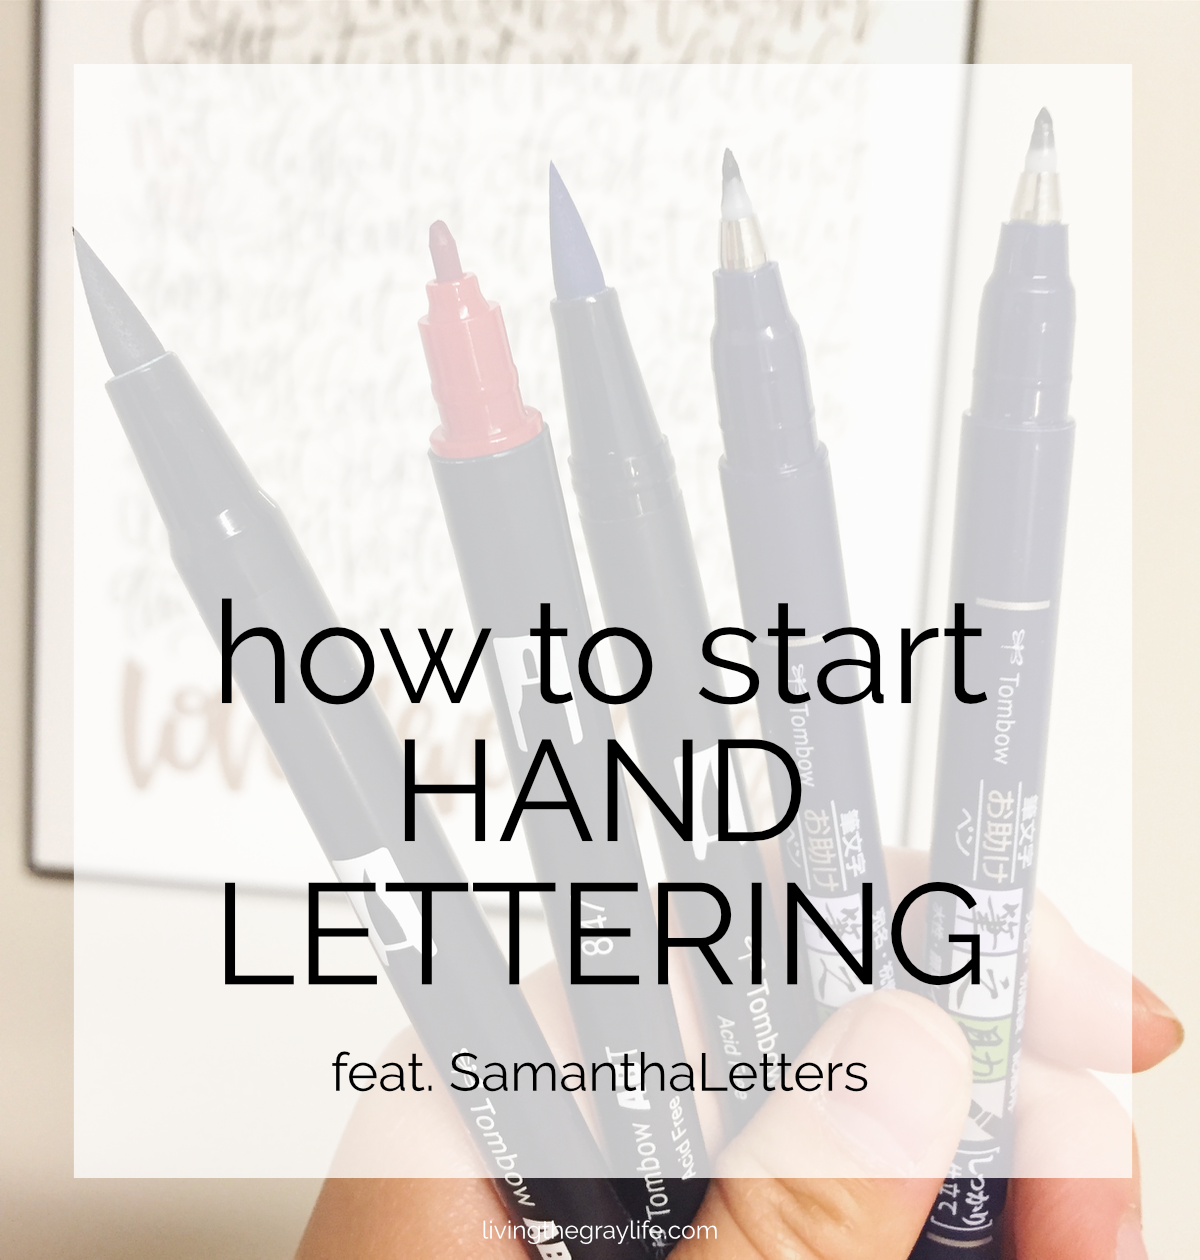 How to Start Hand Lettering feat. SamanthaLetters